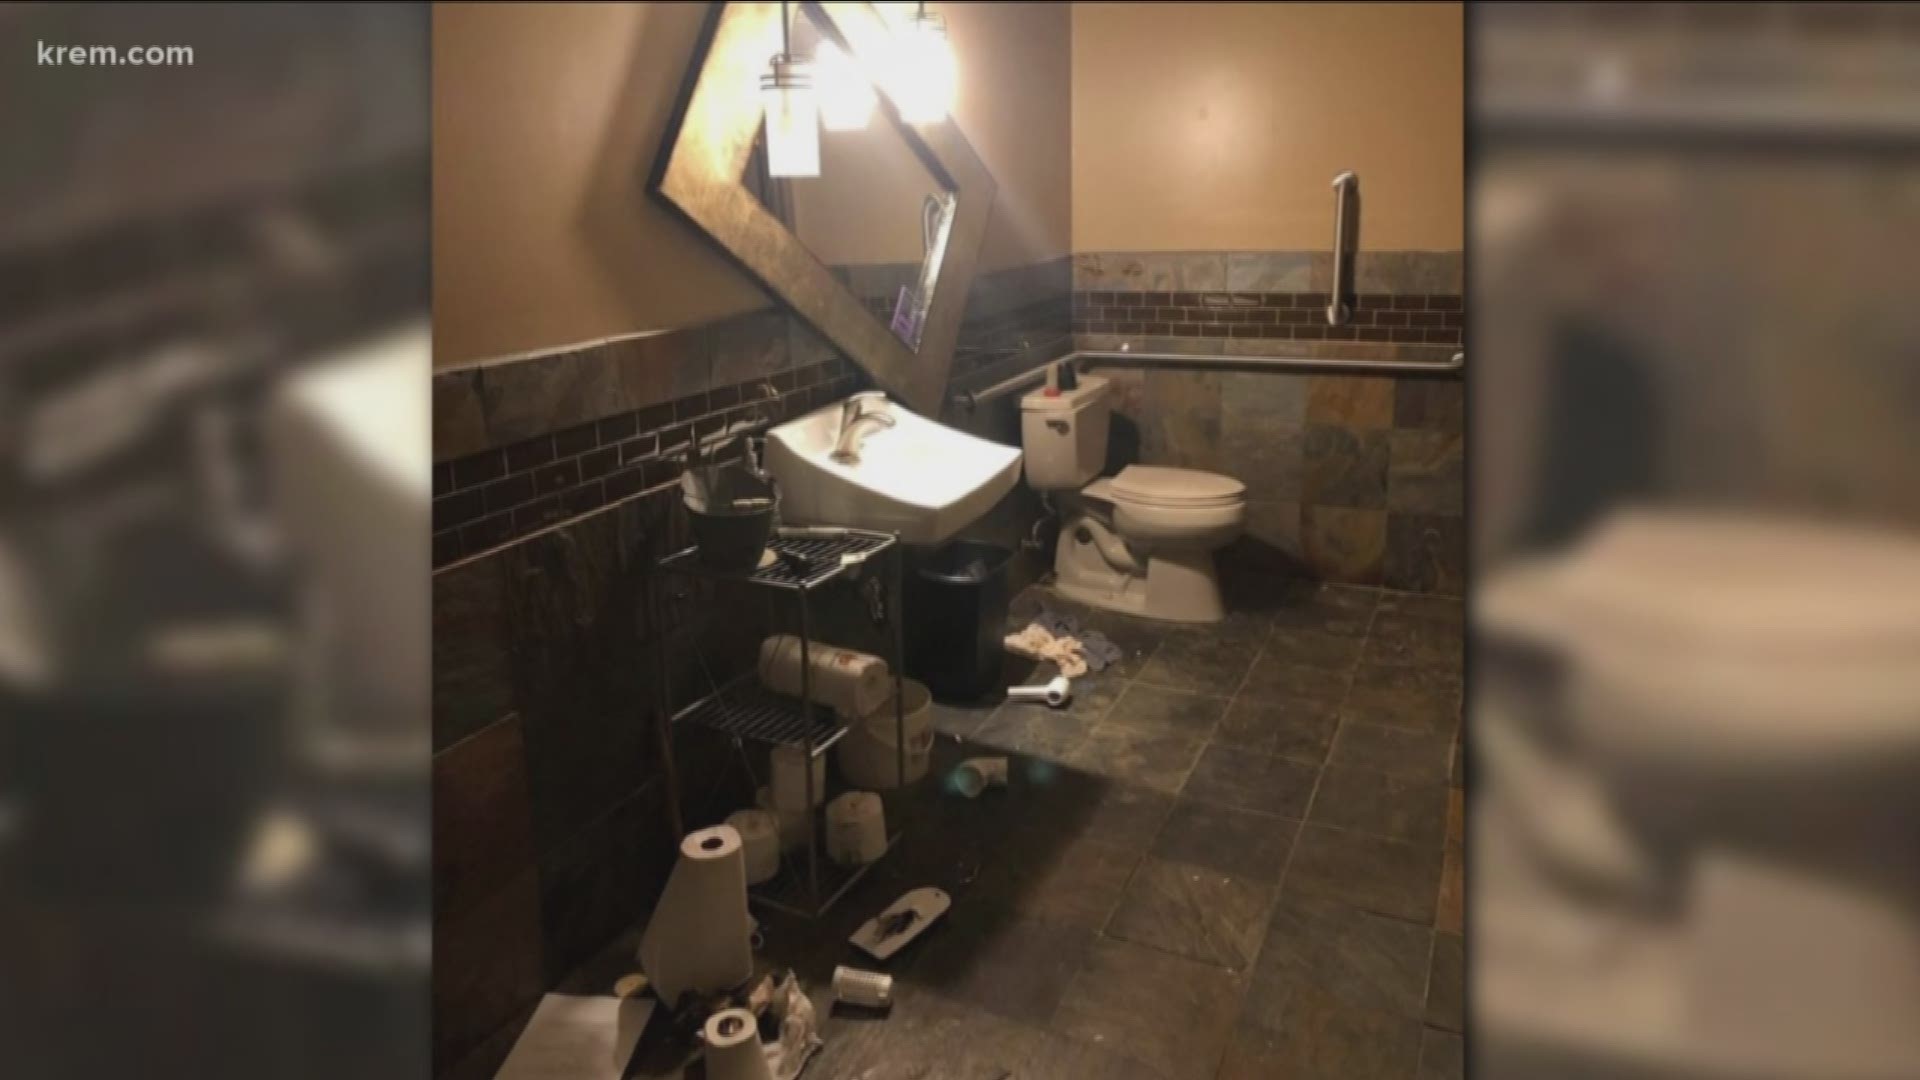 The owner of Nectar Catering and events in downtown Spokane posted this photo of his restroom completely trashed. He says yesterday during a catering event, a man came in and locked himself in the restroom. He didn't leave until Spokane Police arrived.